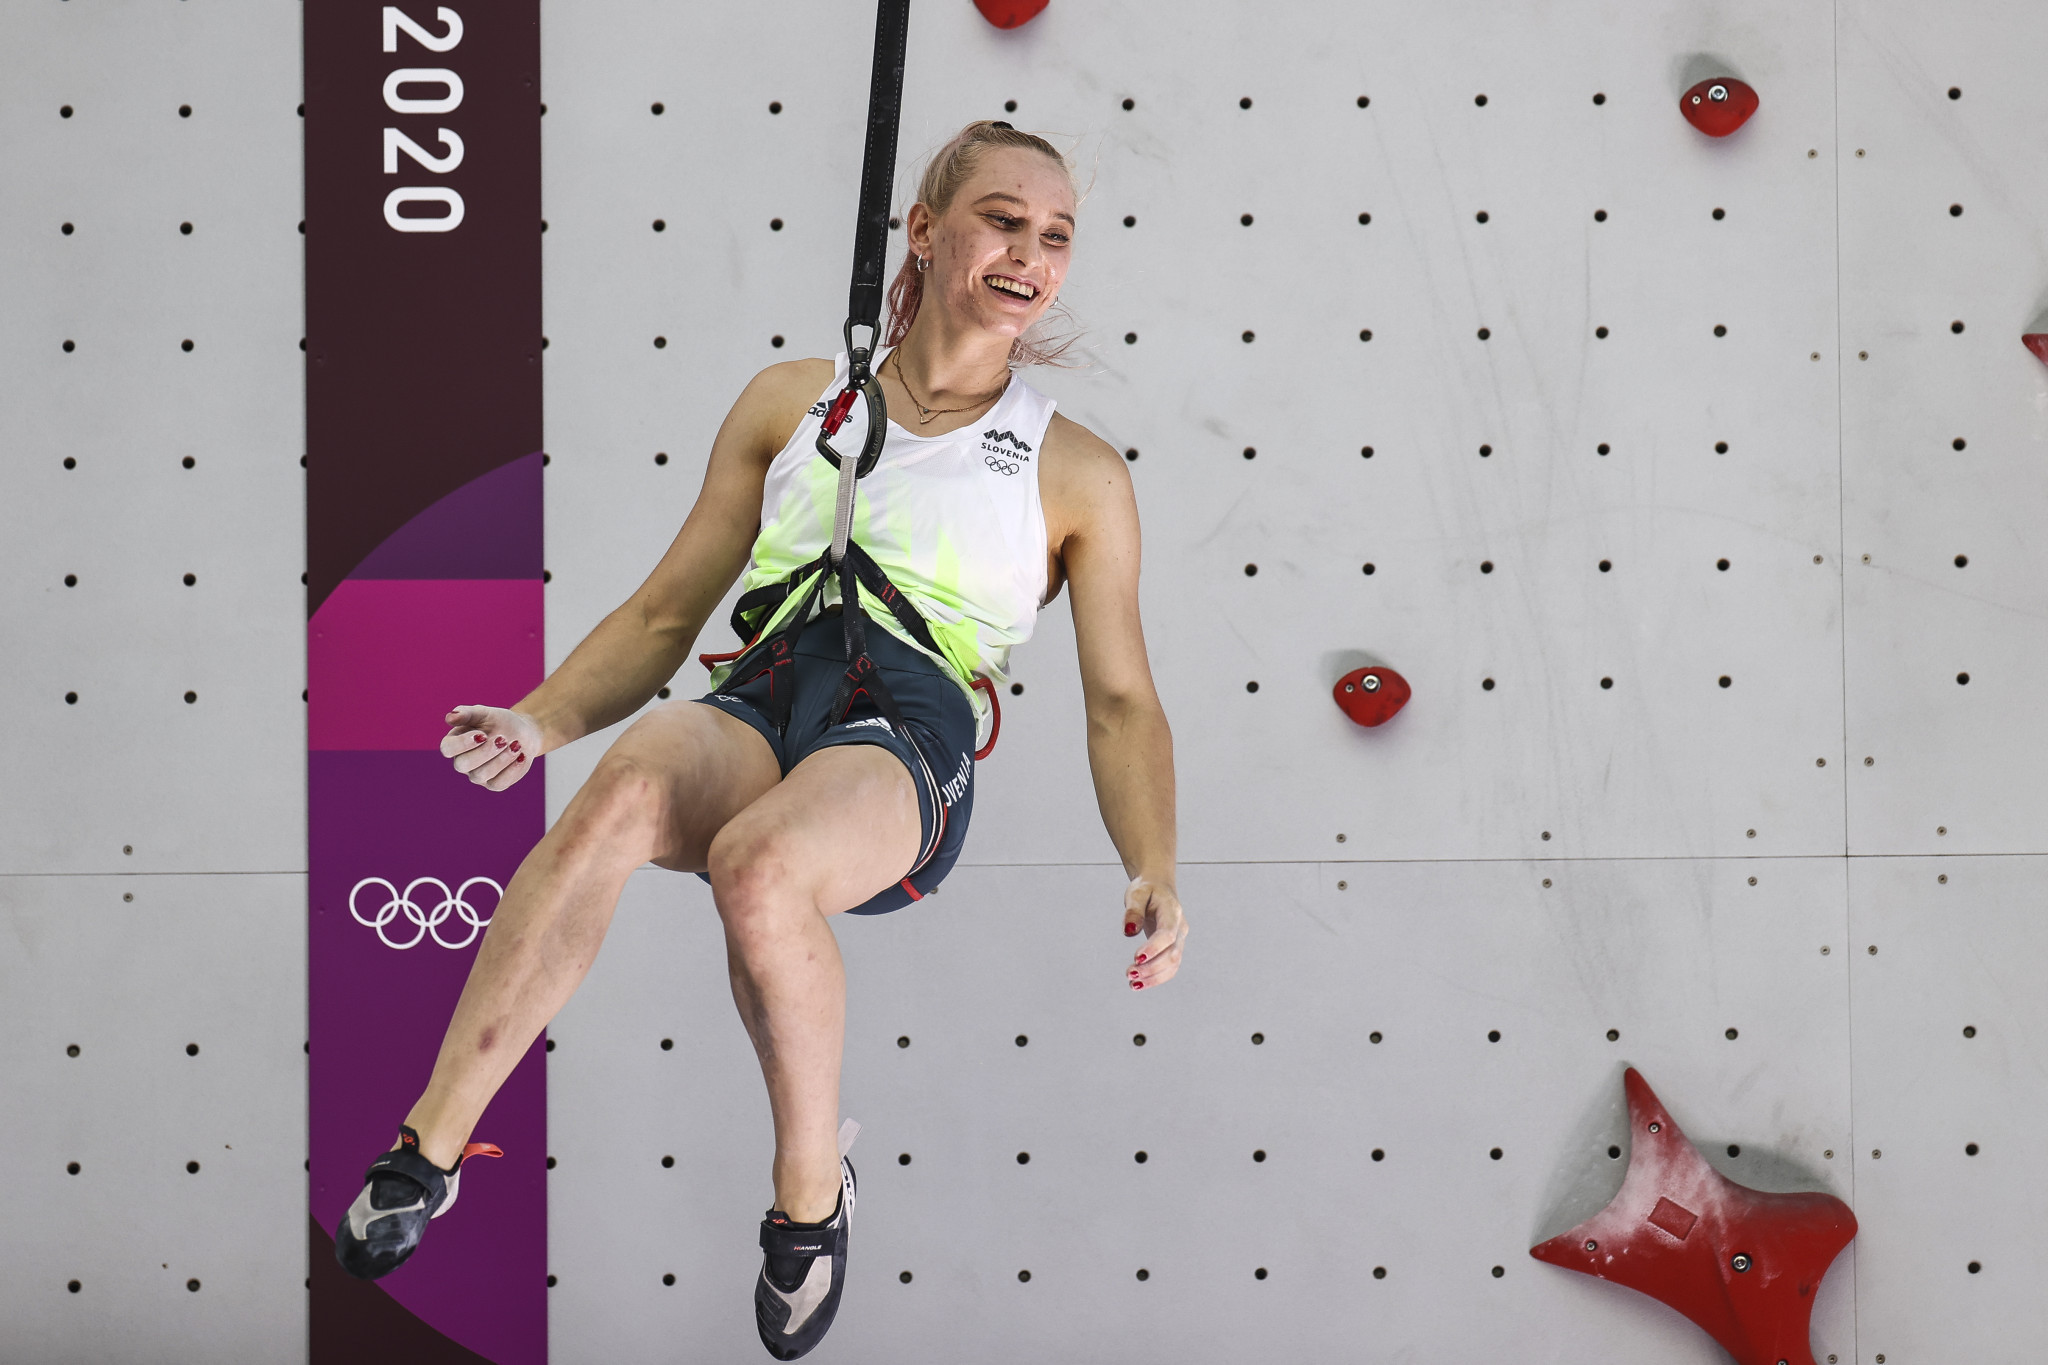 Slovenia's Janja Garnbret was one of the first two athletes to become a sport climbing Olympic champion ©Getty Images